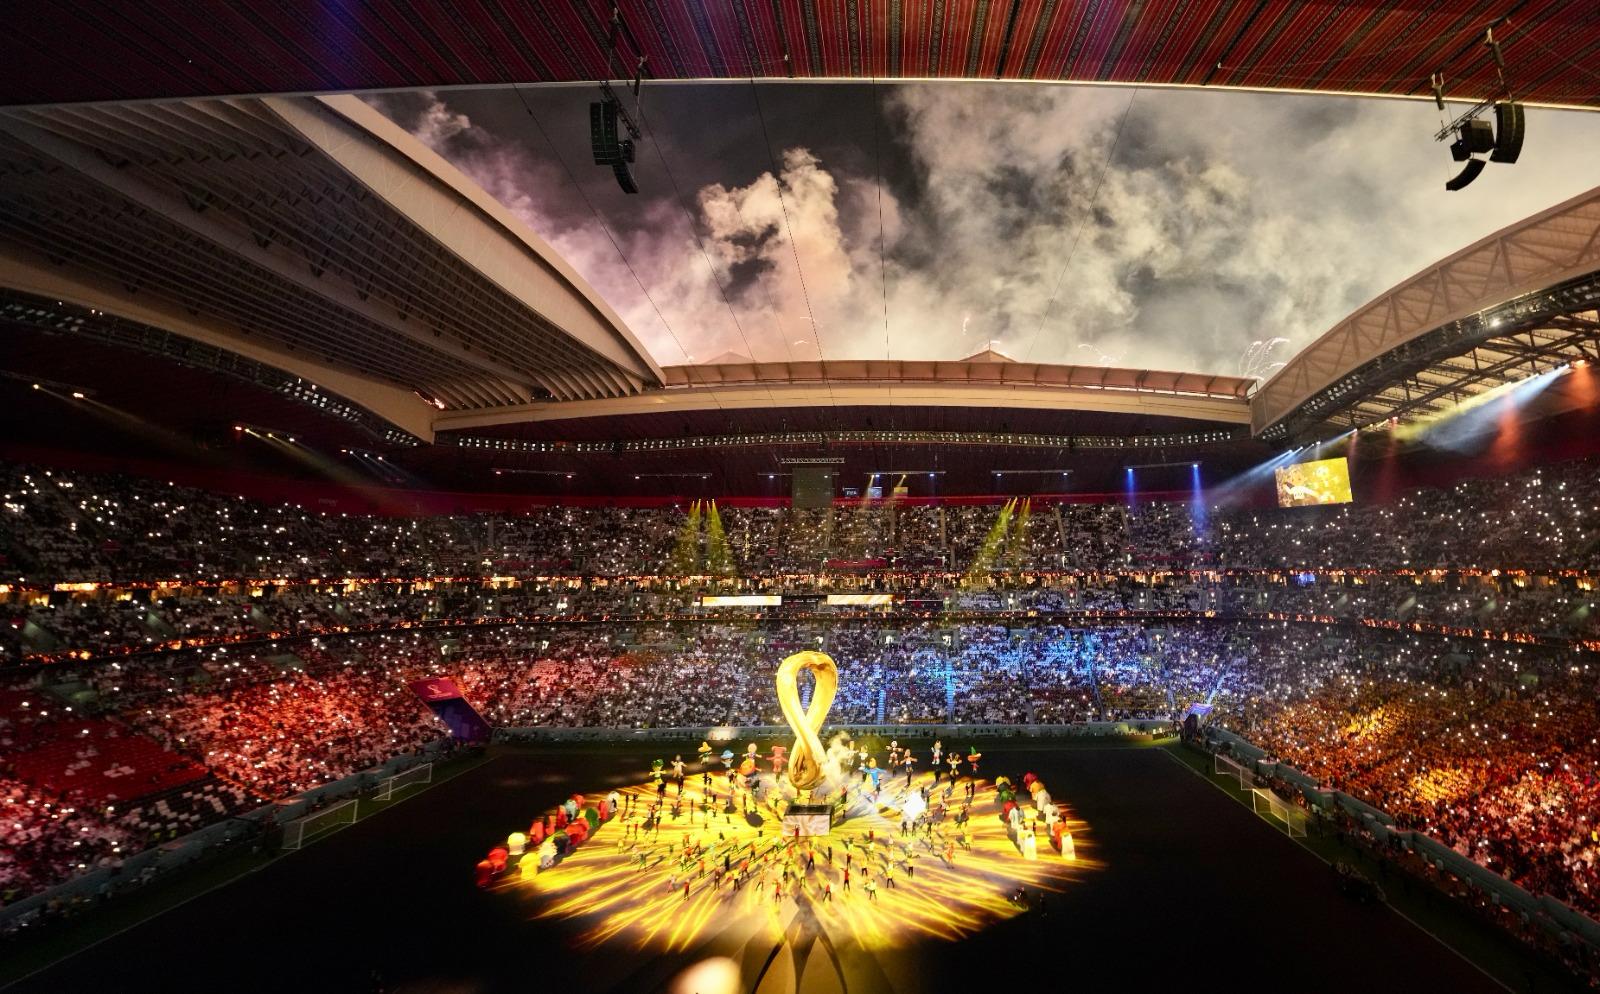 SC Releases Report on FIFA World Cup Qatar 2022 Journey